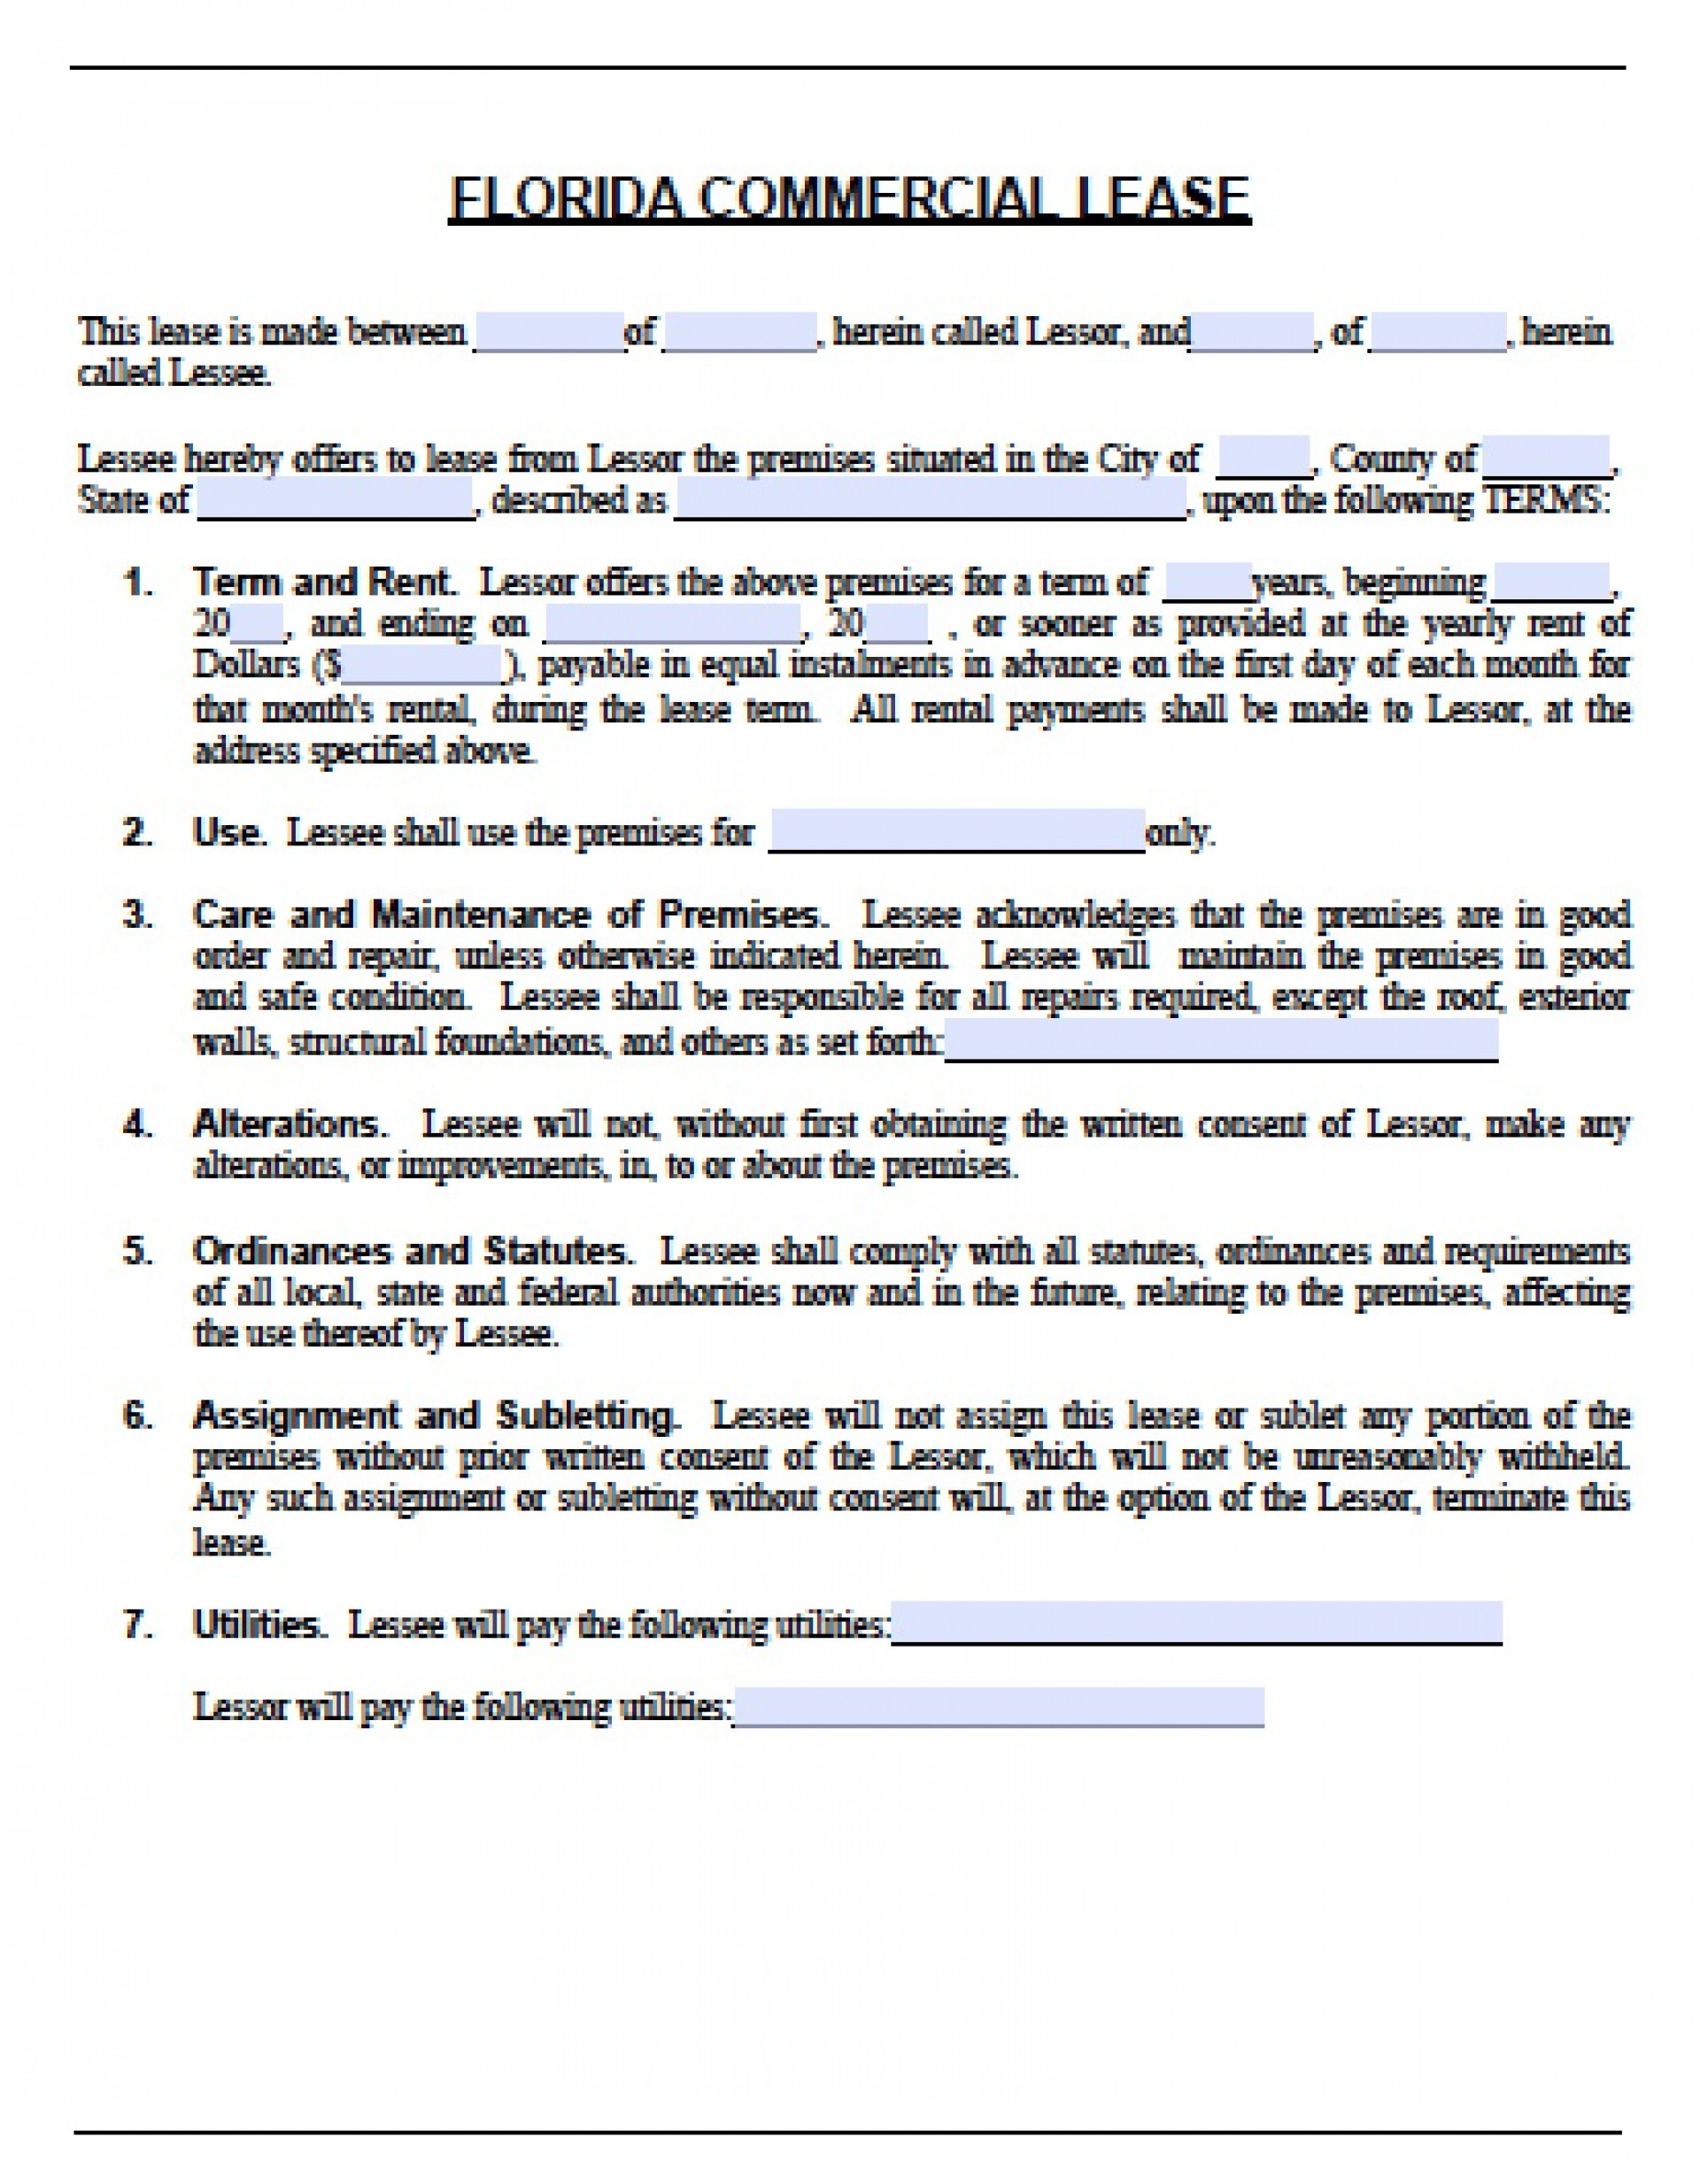 Florida Lease Agreement 003 Template Ideas Office Lease Agreement Florida Commercial Short